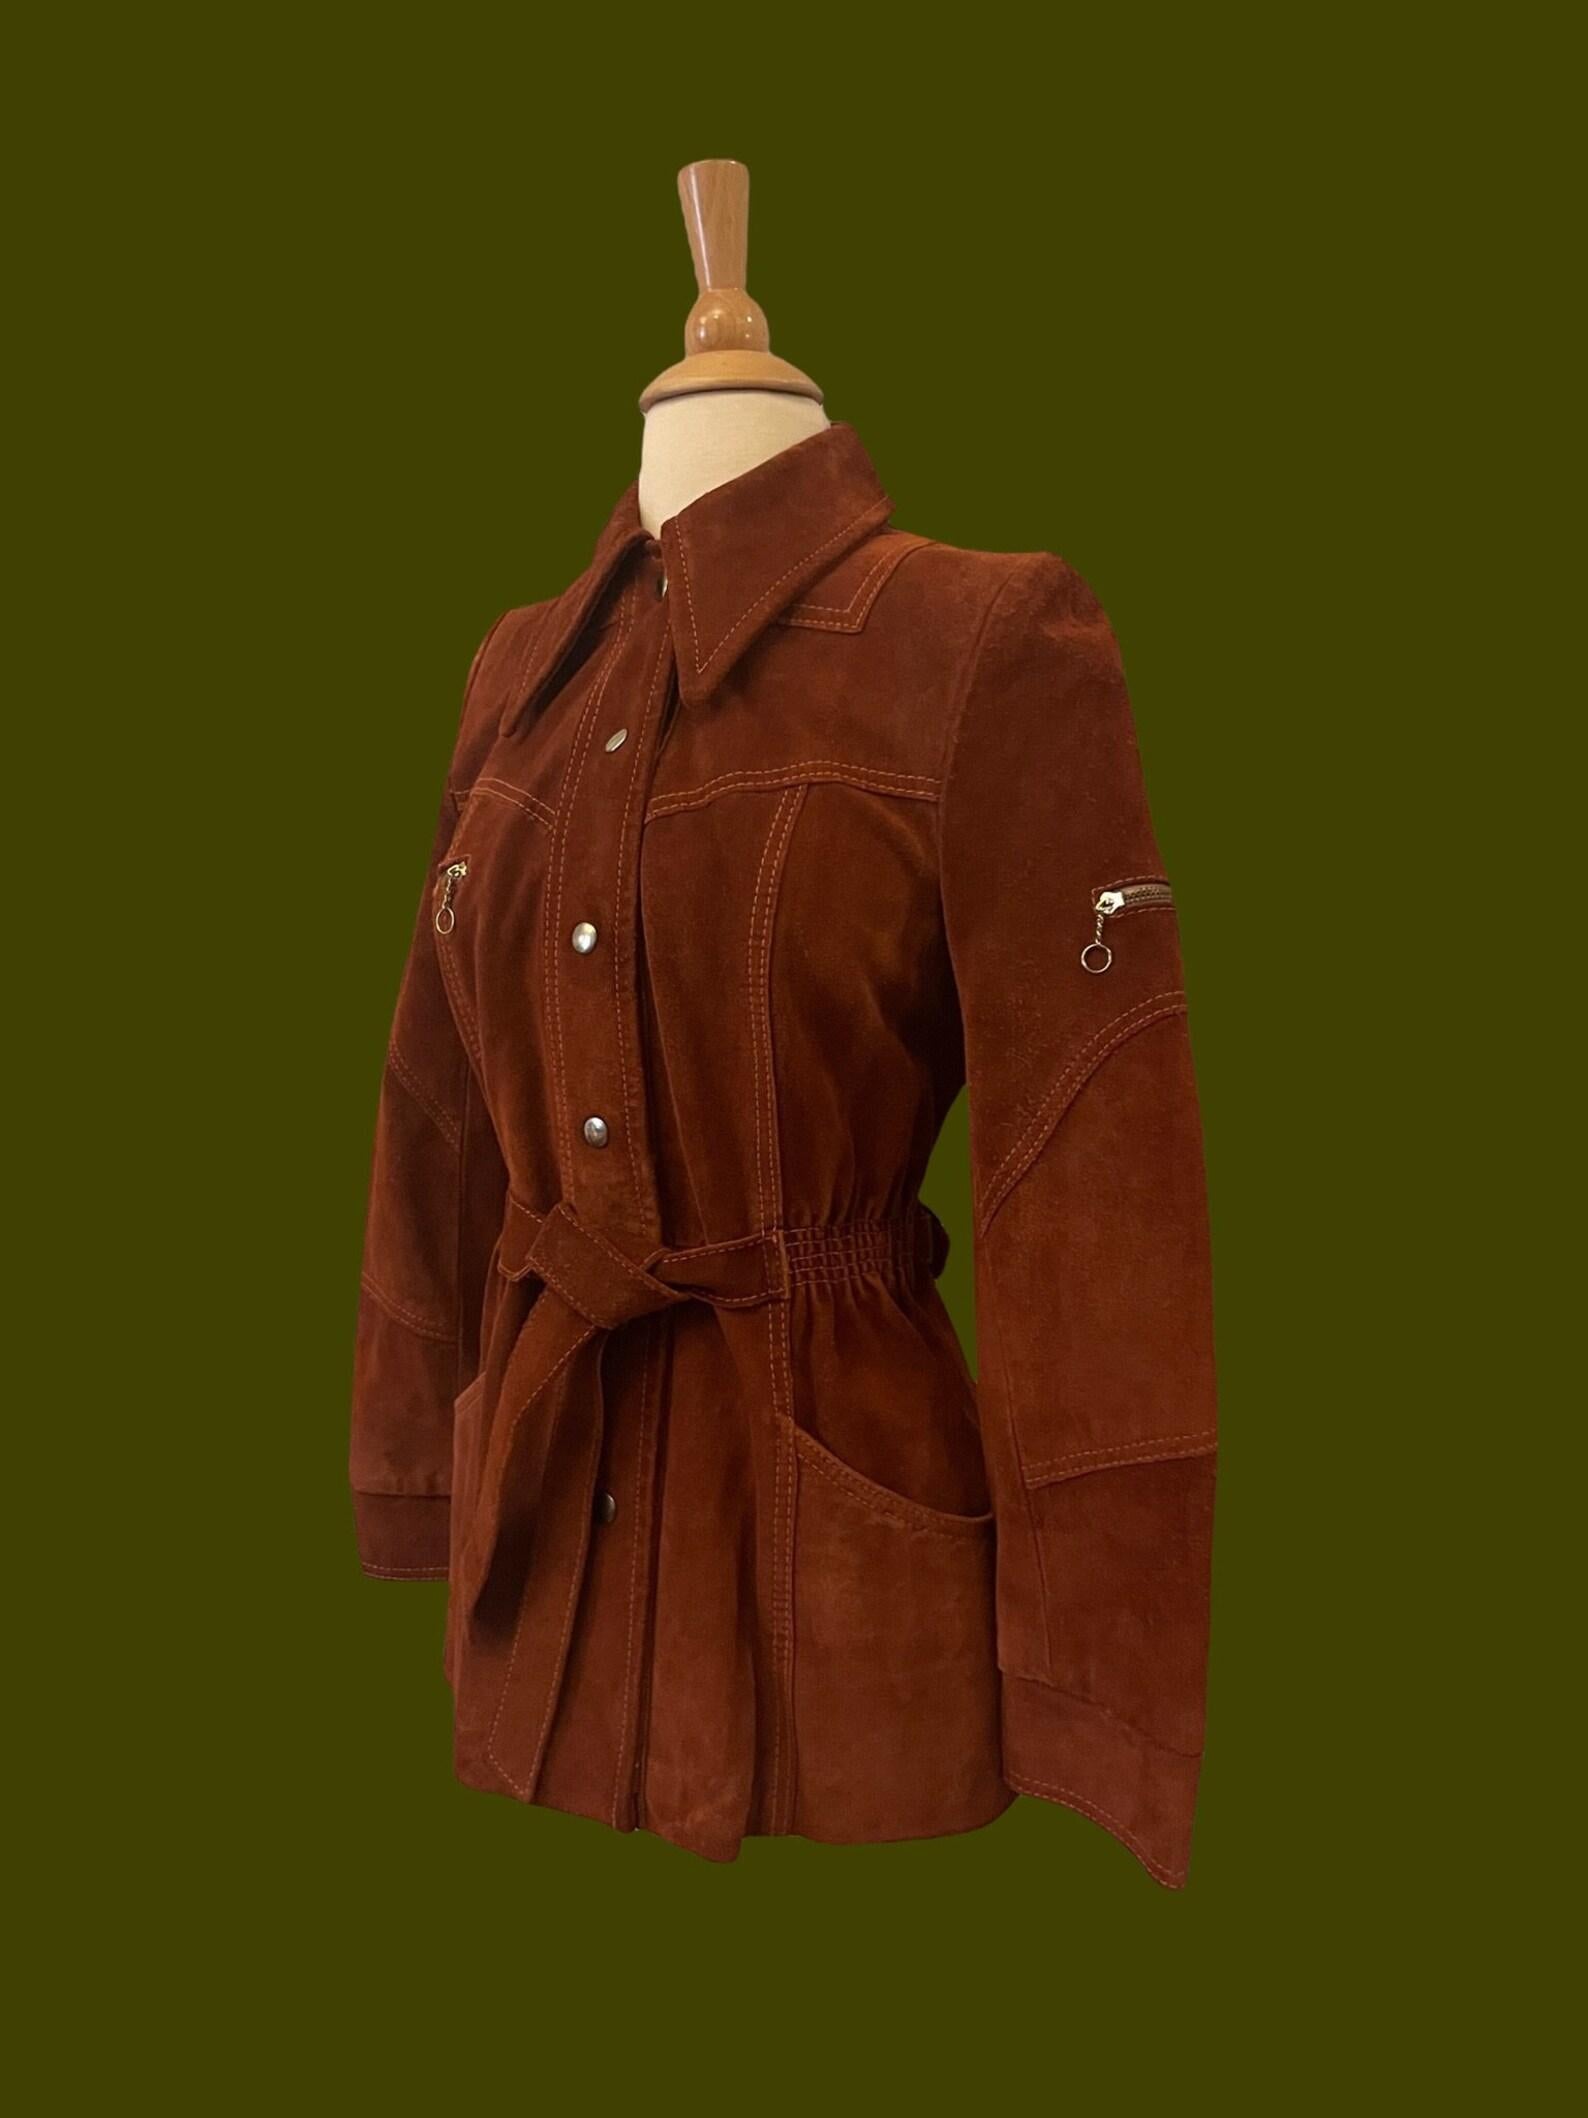 Women's Rust Brown Suede Jacket, Circa 1970s For Sale